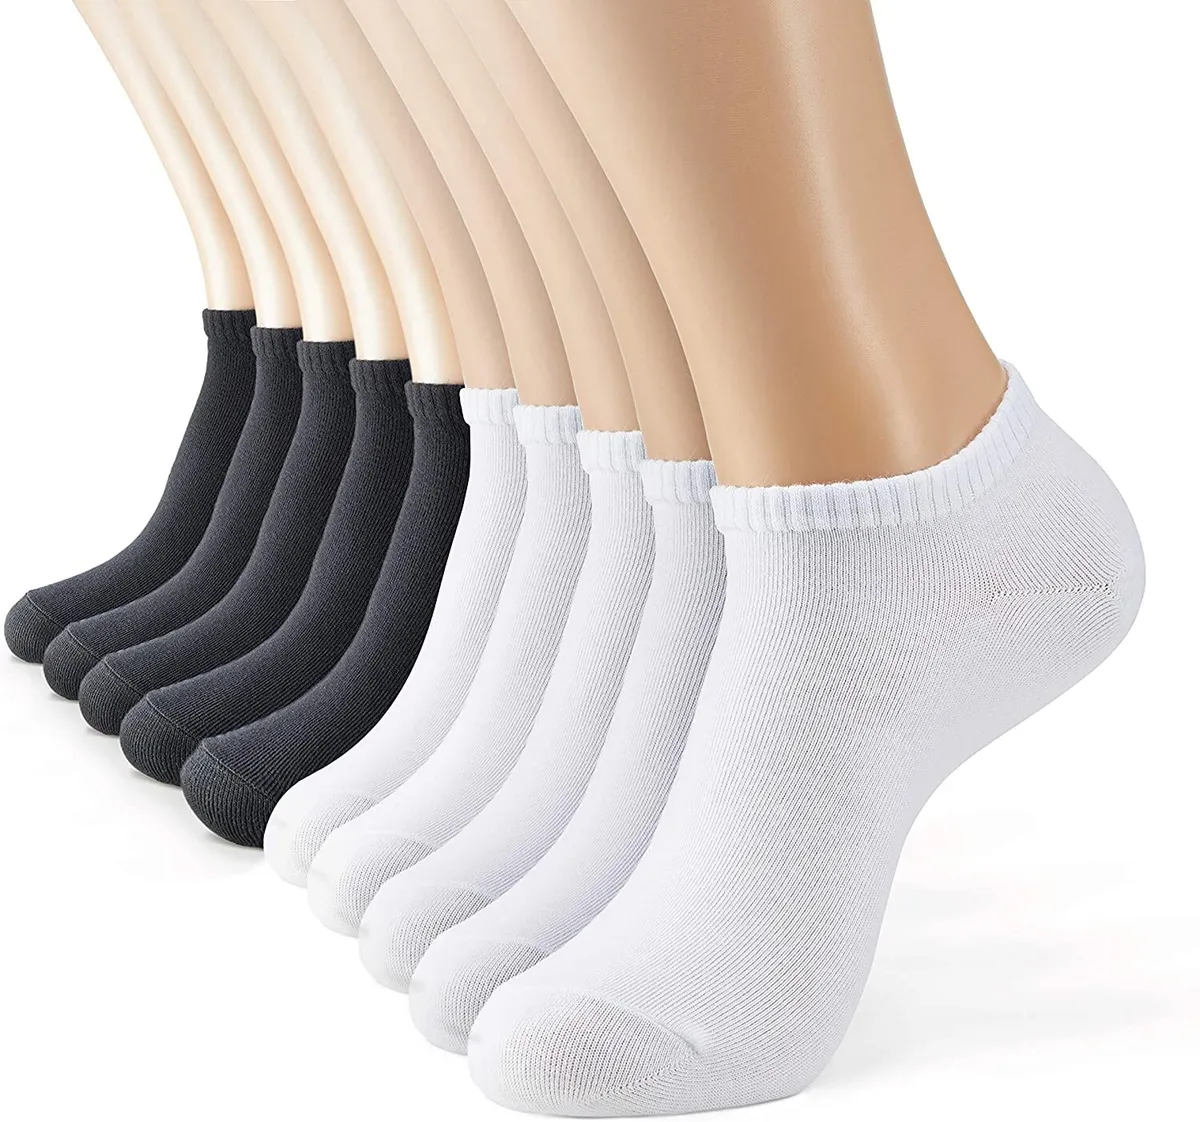 Lot 3-12 Pairs Mens Womens Sport Low Cut no-Show Casual Socks Size